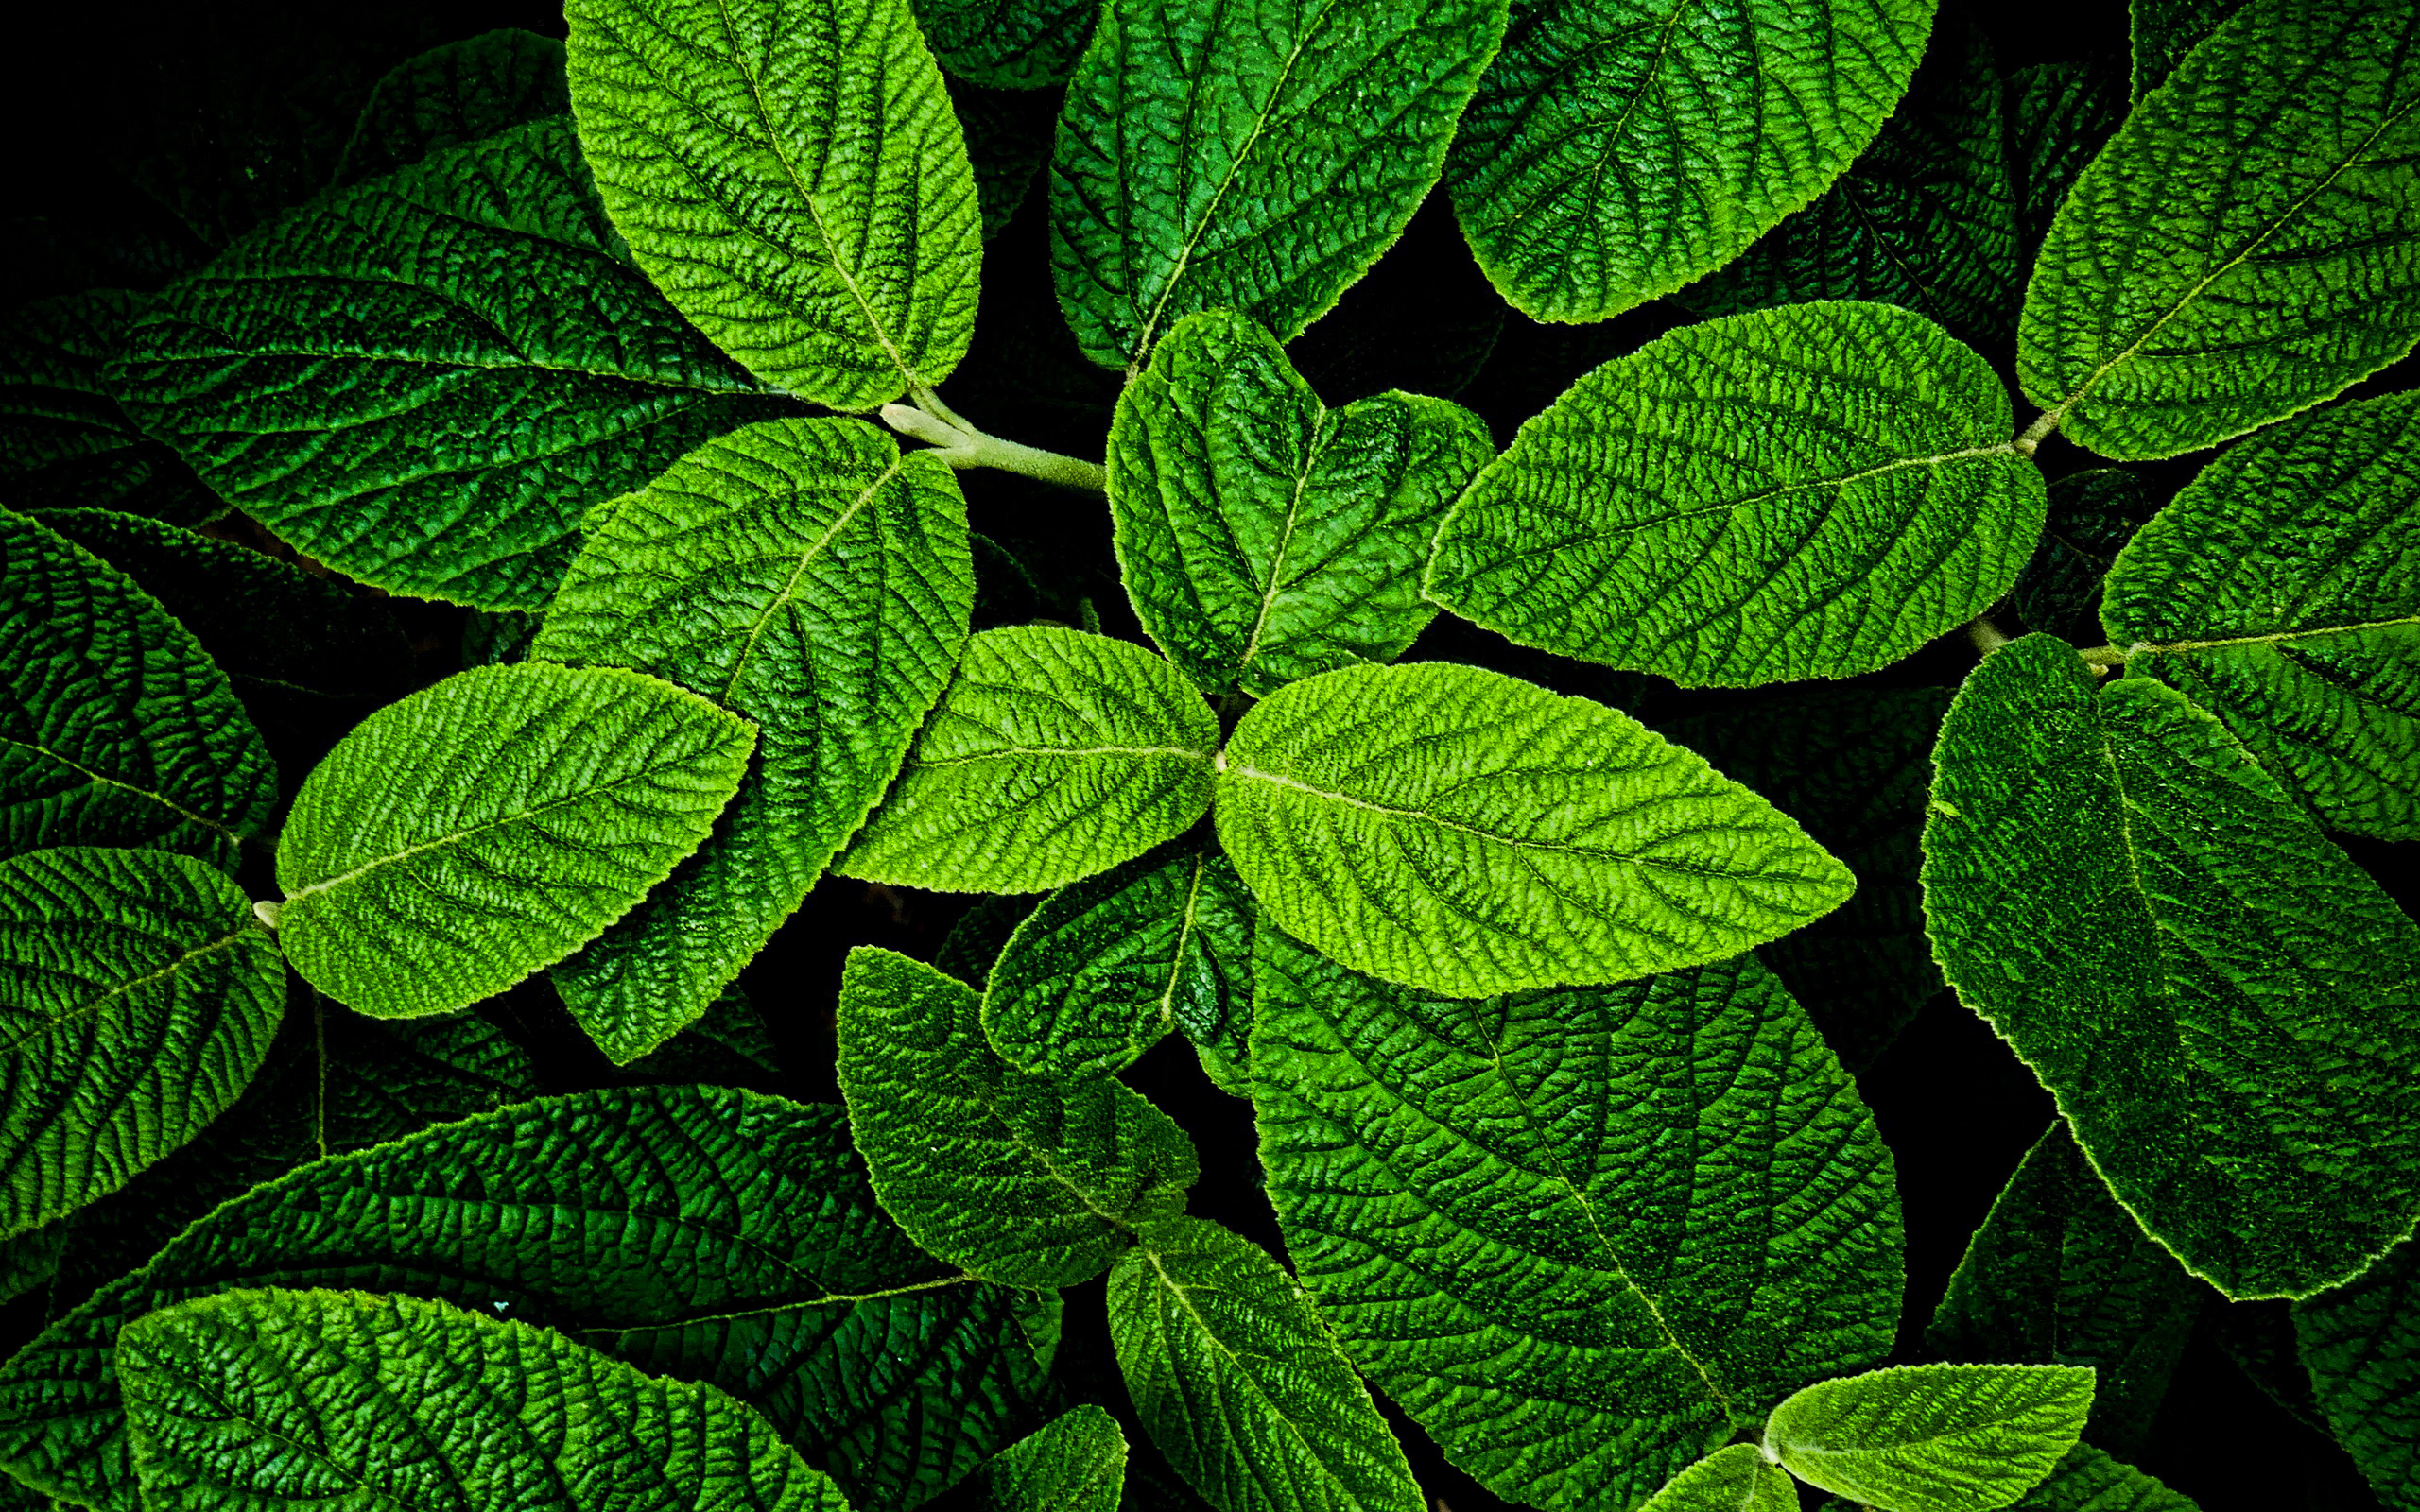 Download wallpapers mint, green leaves texture, plant textures, leaves